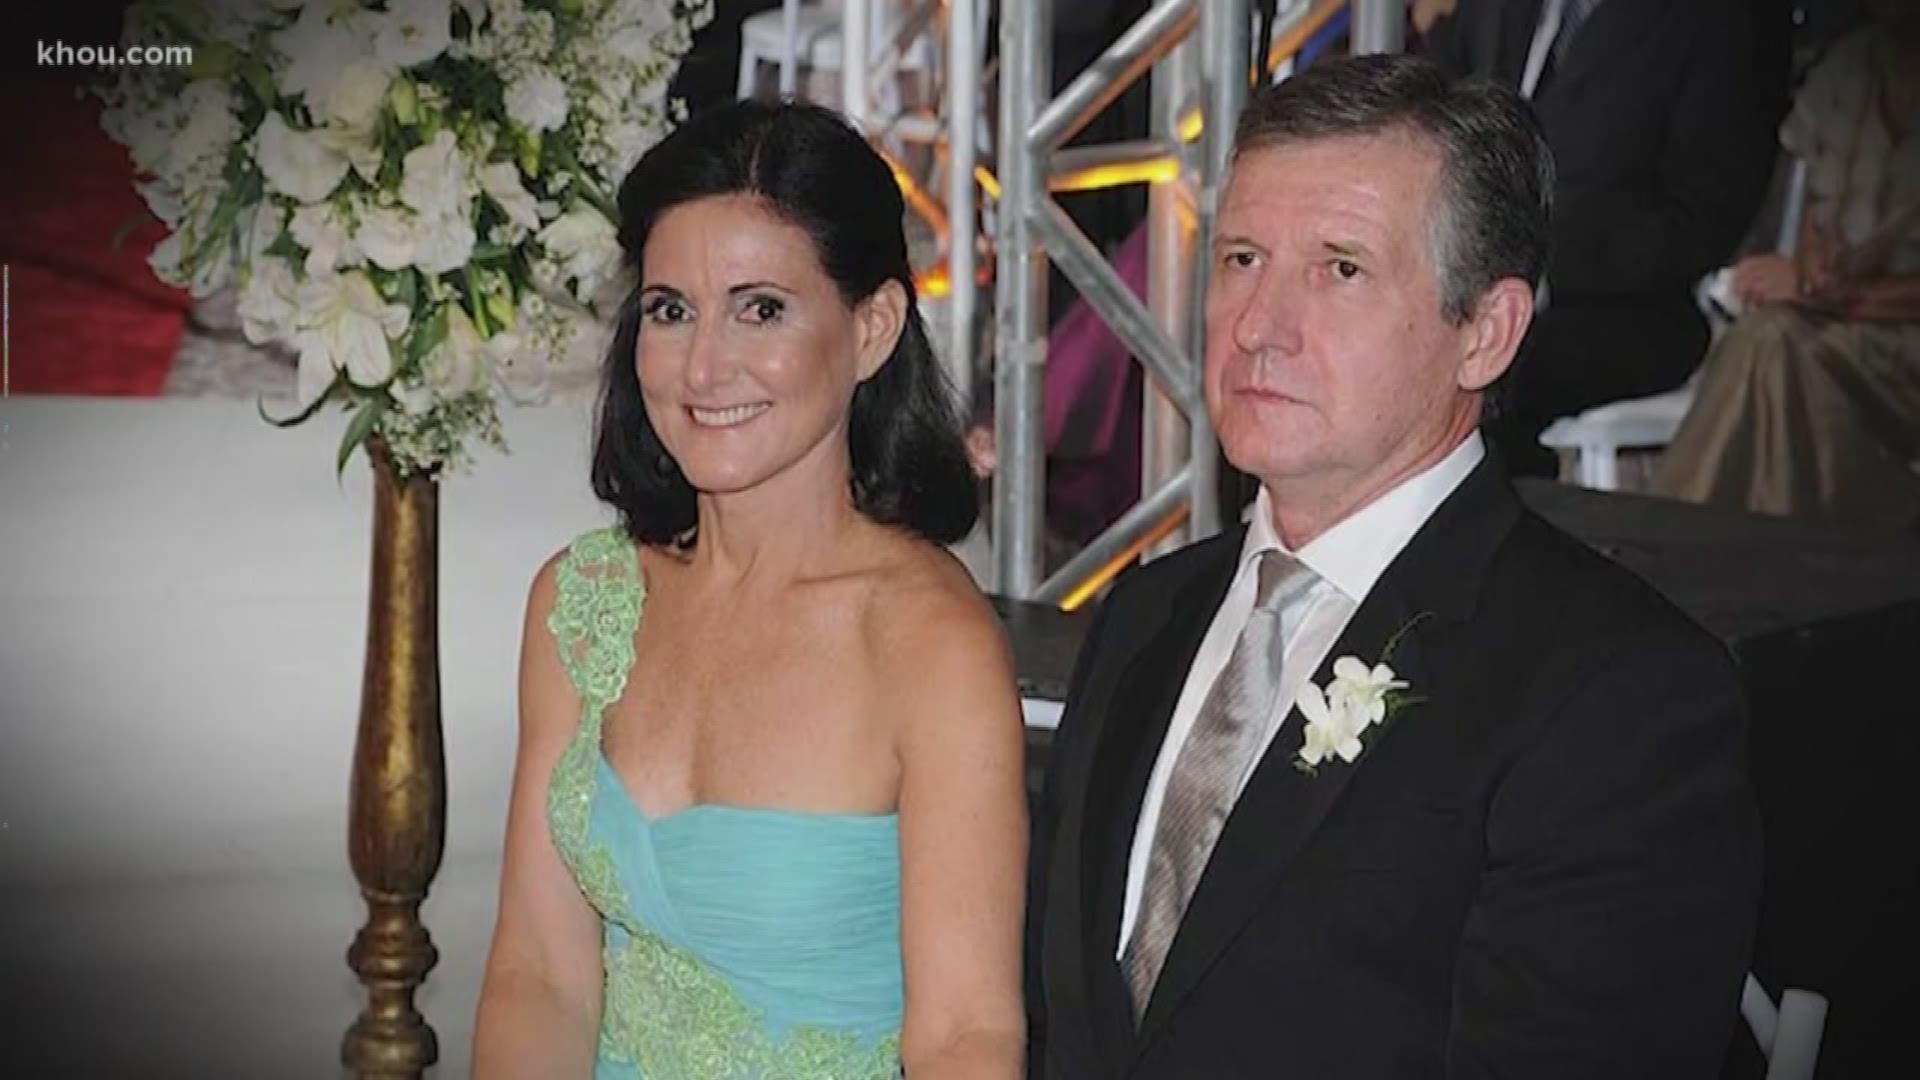 Brazilian grandparents Carlos and Jemima Guimaraes will report to prison soon, but not before taking a shot in court at their former son-in-law, Dr. Chris Brann.